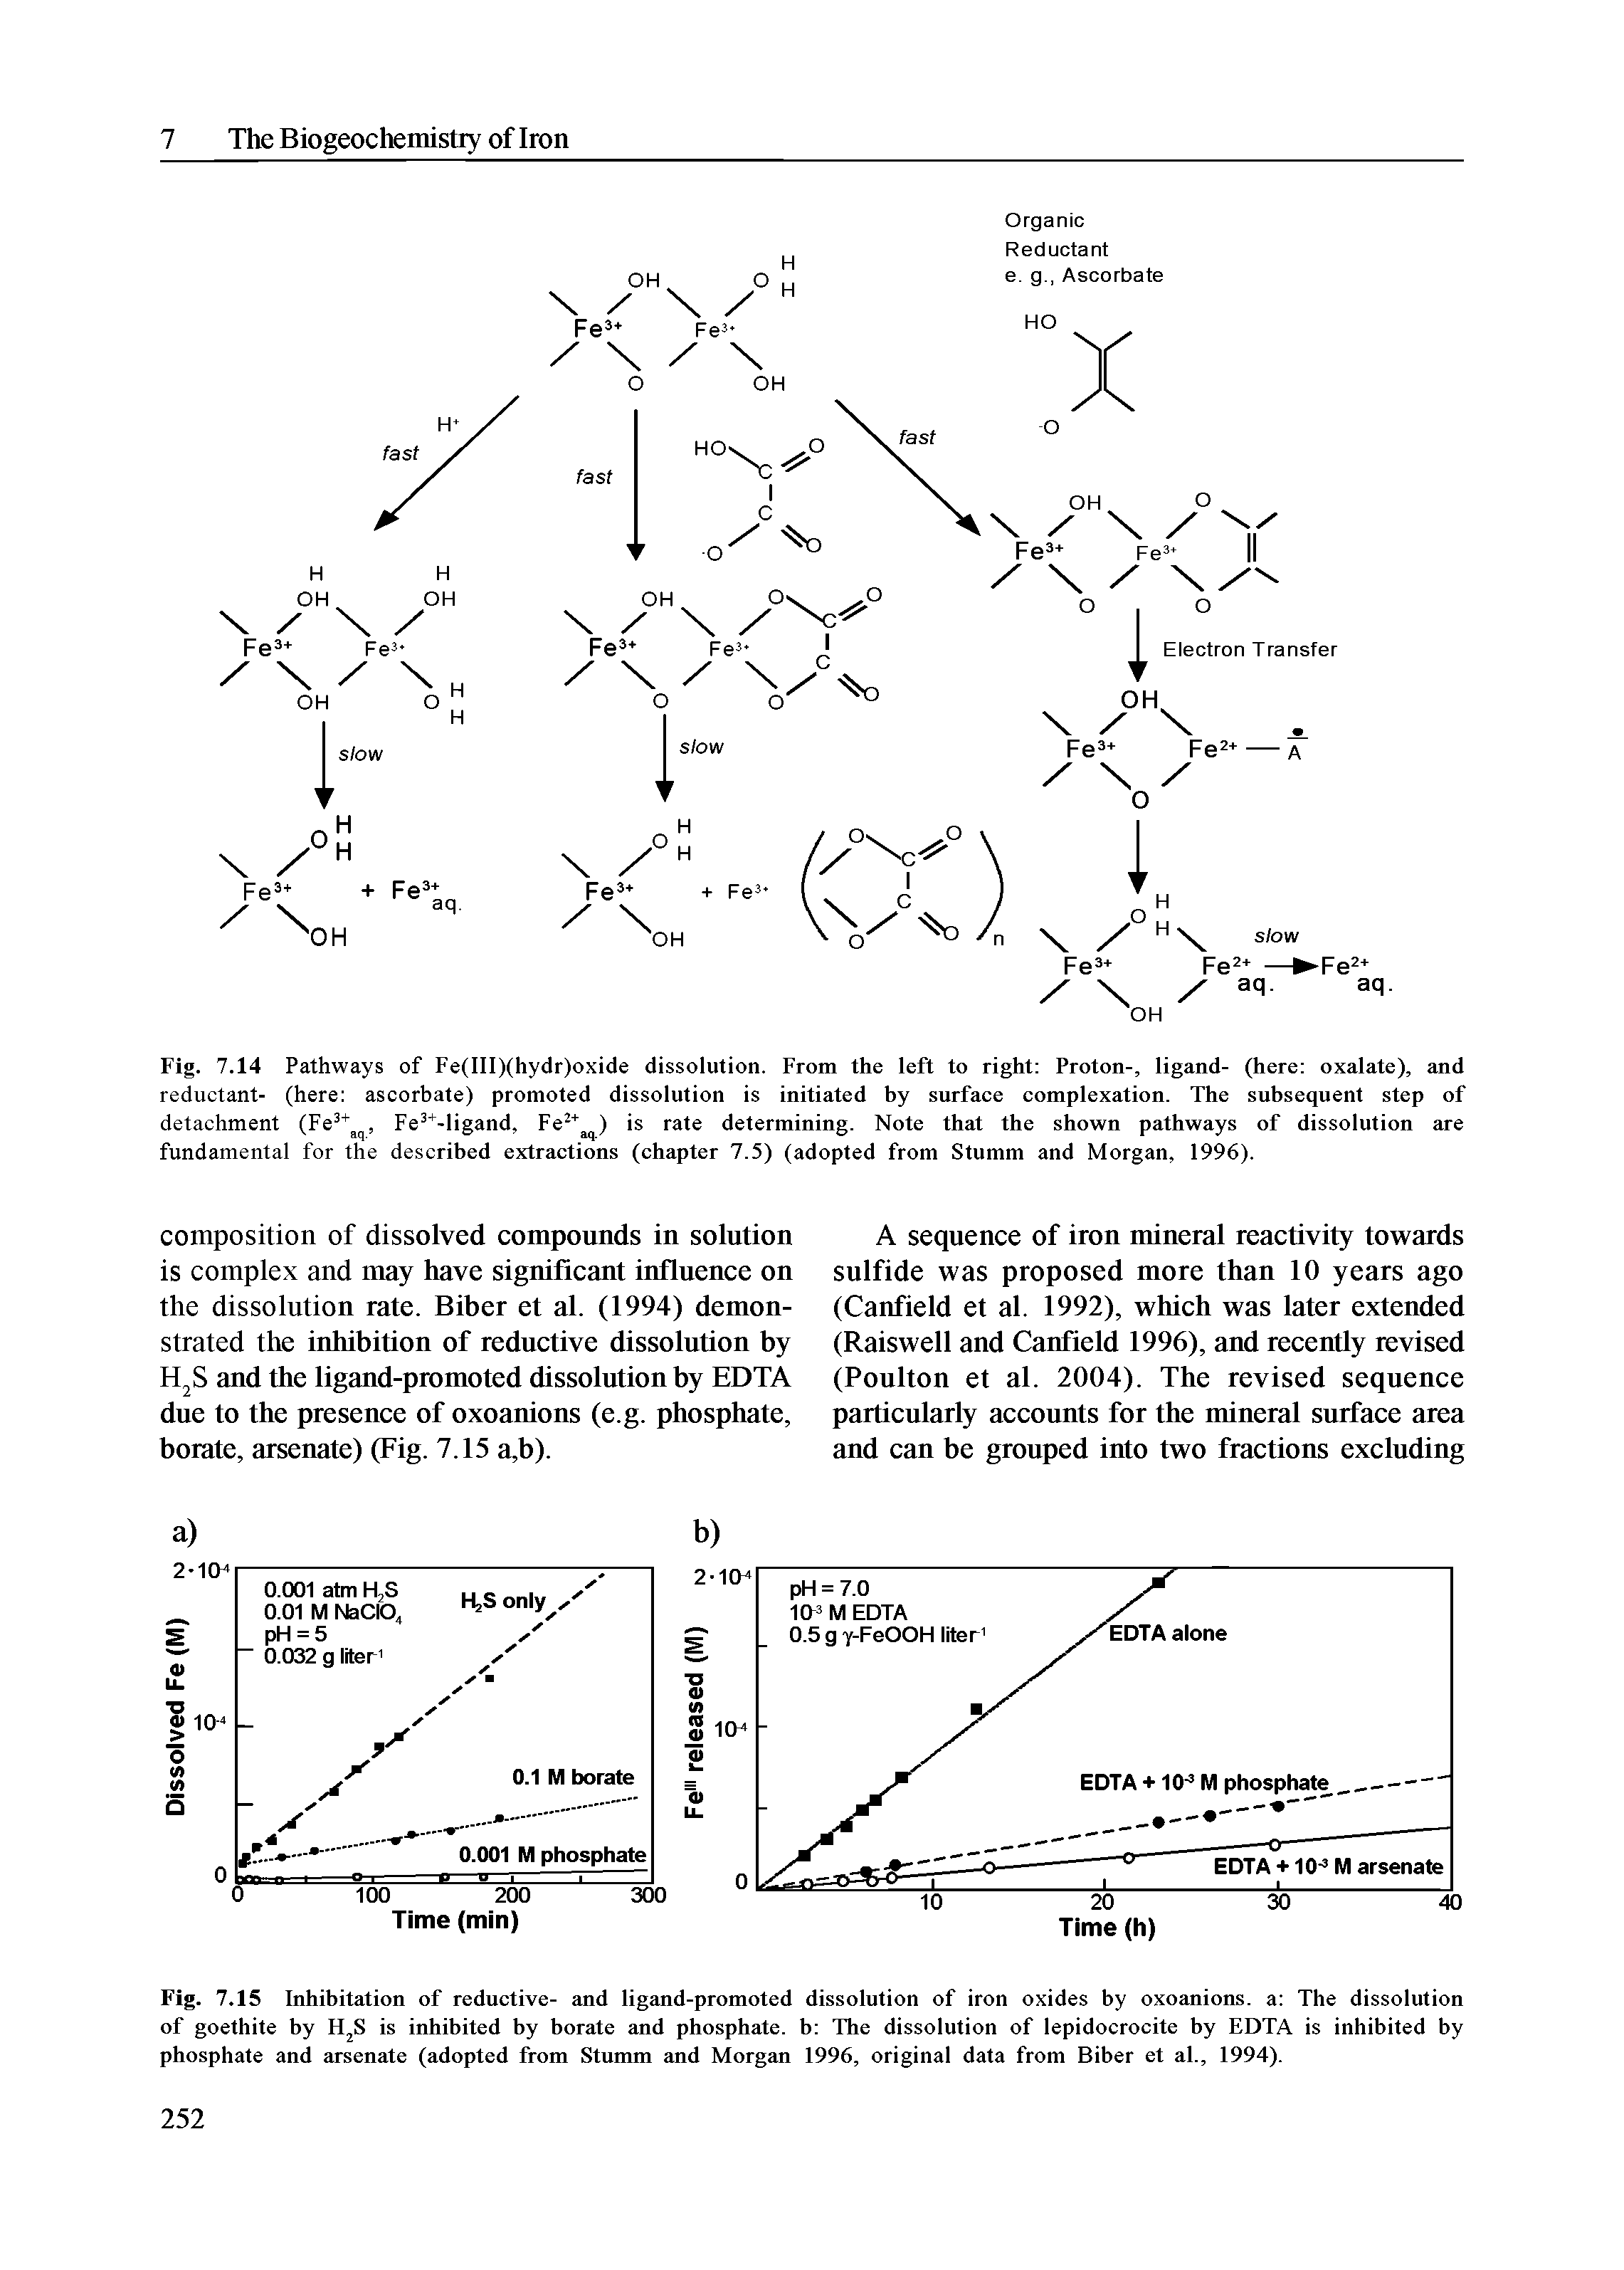 Fig. 7.15 Inhibitation of reductive- and ligand-promoted dissolution of iron oxides by oxoanions. a The dissolution of goethite by H S is inhibited by borate and phosphate, b The dissolution of lepidocrocite by EDTA is inhibited by phosphate and arsenate (adopted from Stumm and Morgan 1996, original data from Biber et at, 1994).